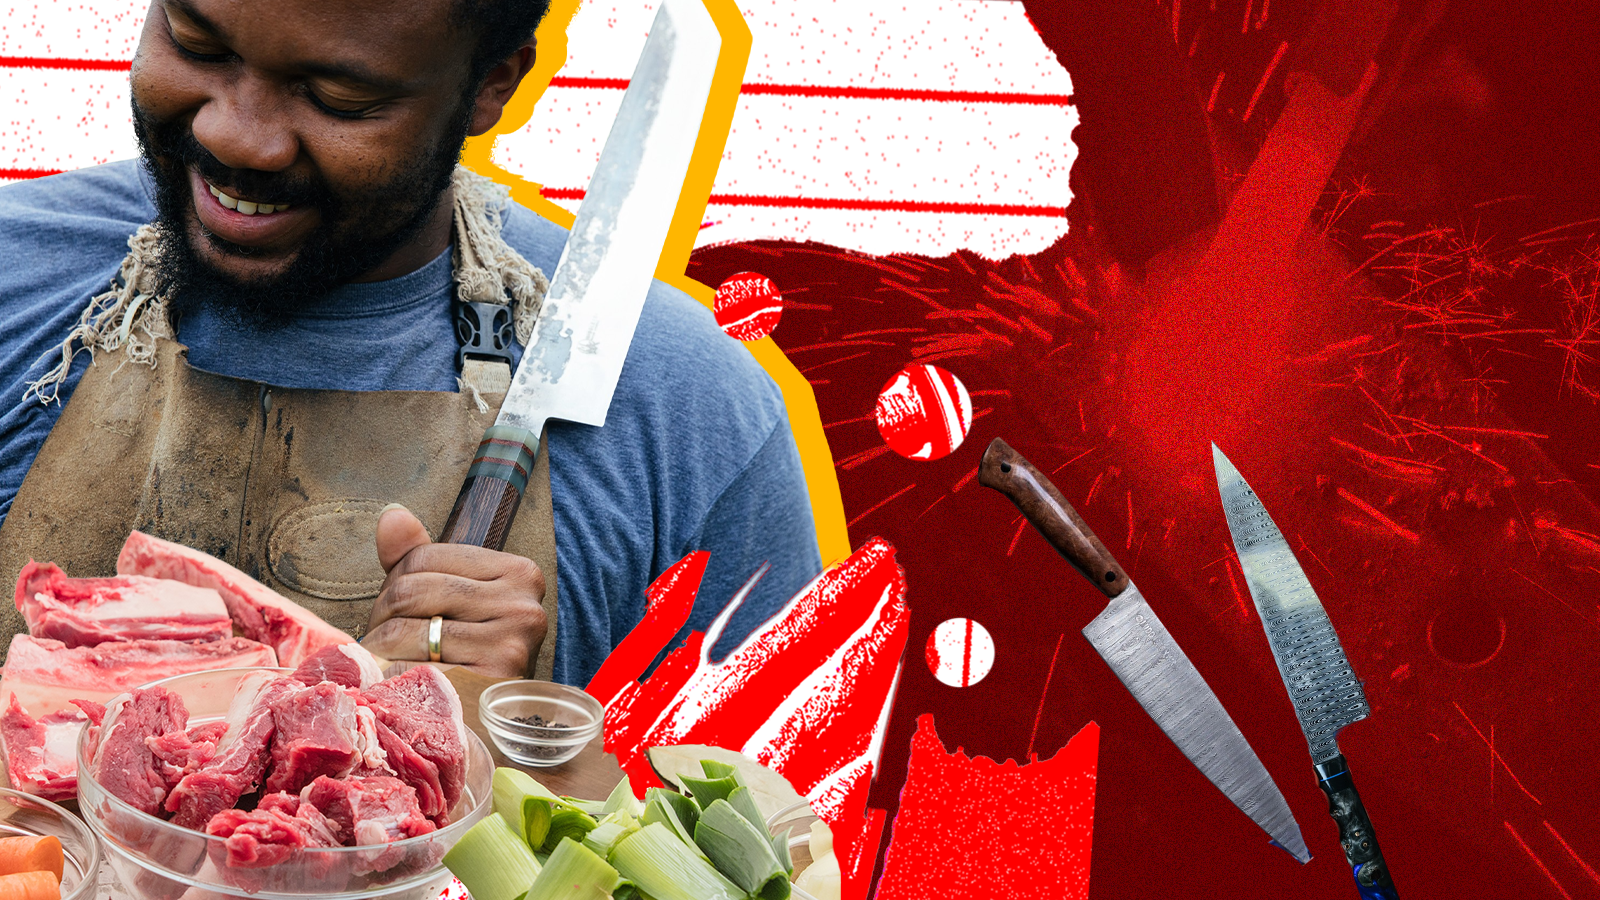 A portrait of a Black man holding a knife, collaged with raw ingredients.